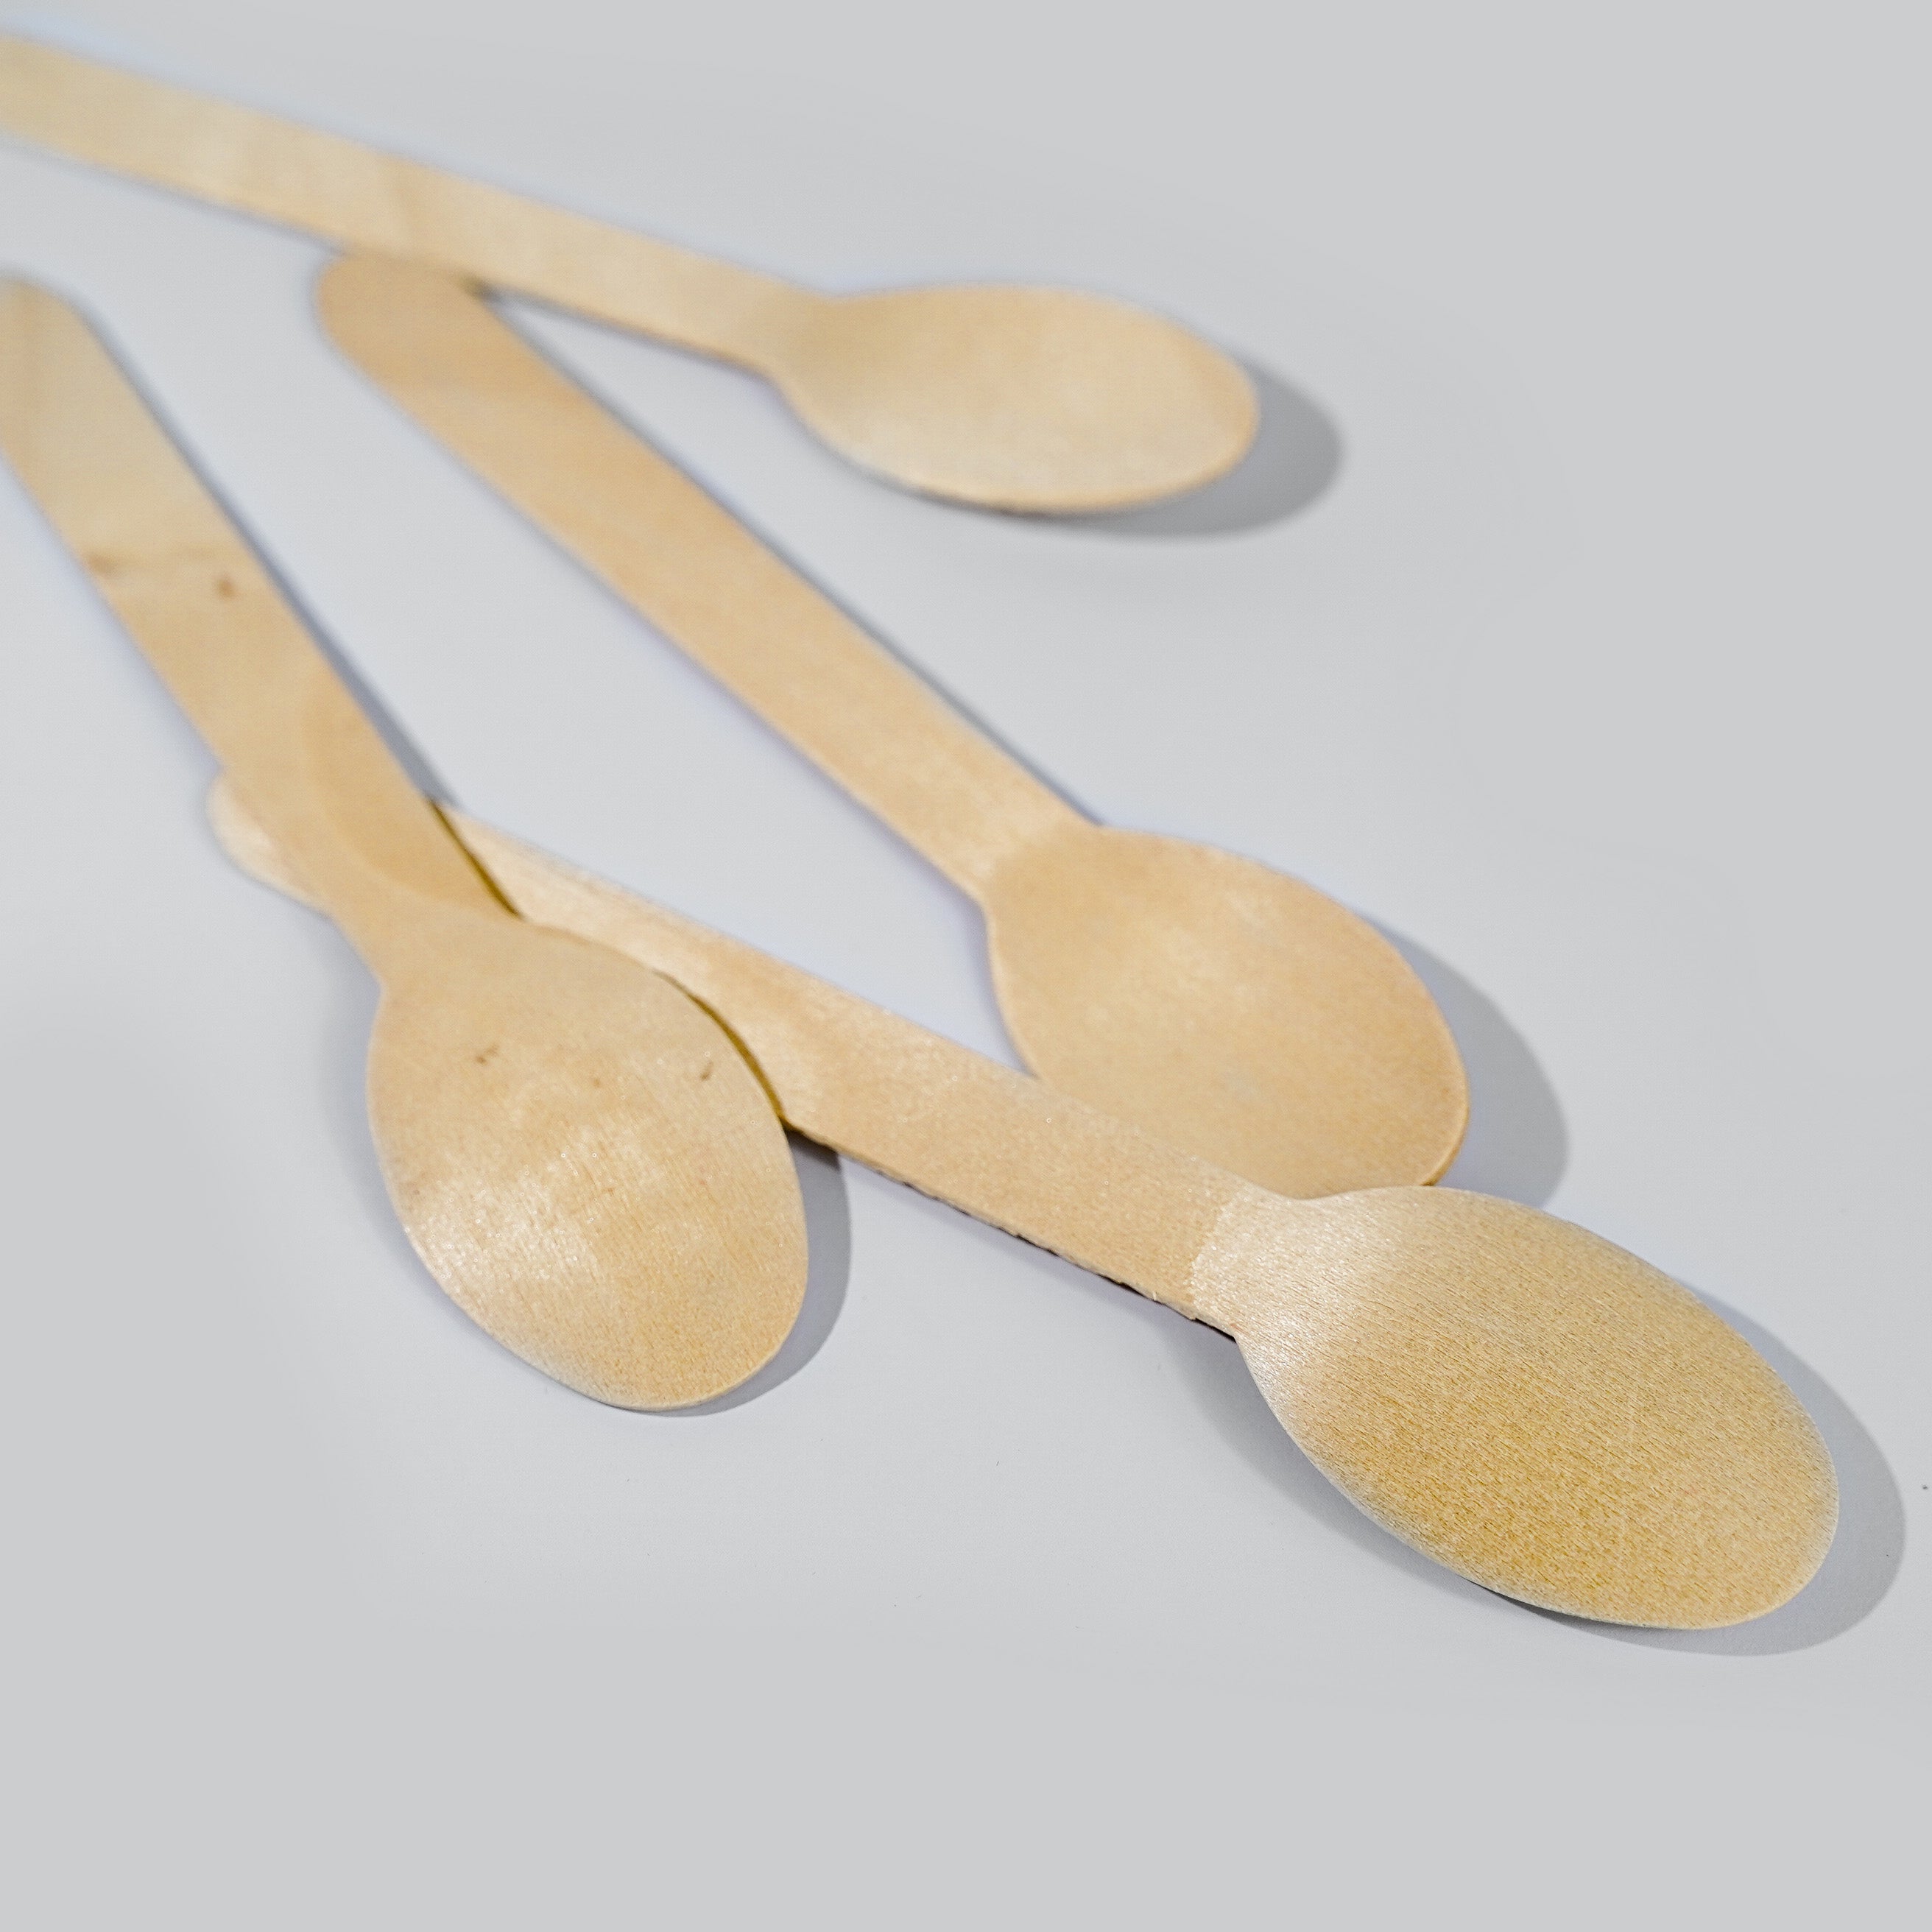 Wooden Spoons (Wholesale/Bulk) - 1000 count by EQUO